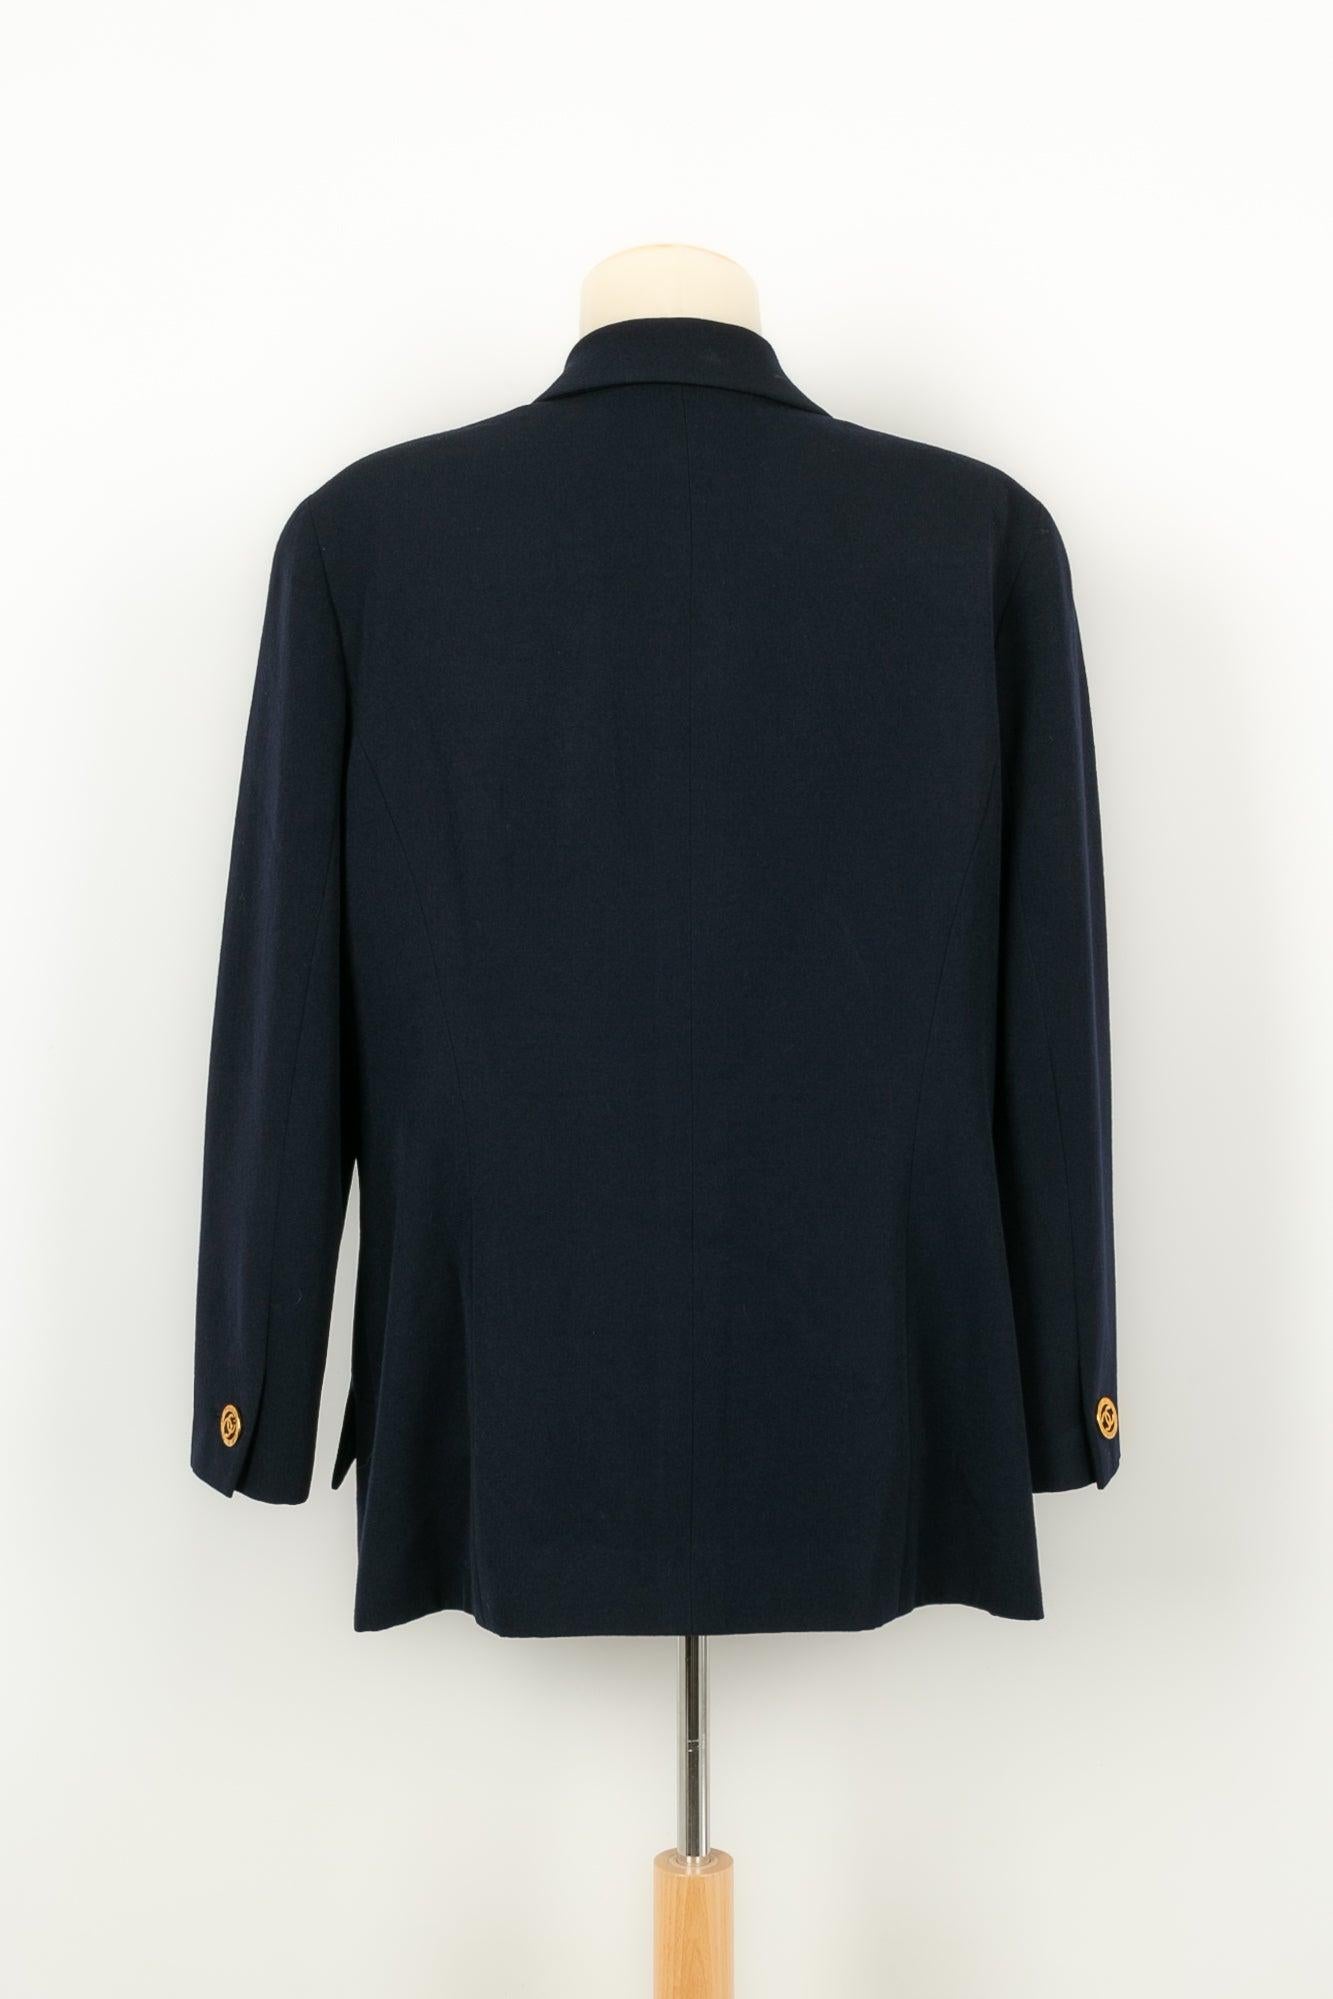 Chanel Navy Blue Wool Jacket with a Silk Lining, 1990s In Excellent Condition For Sale In SAINT-OUEN-SUR-SEINE, FR